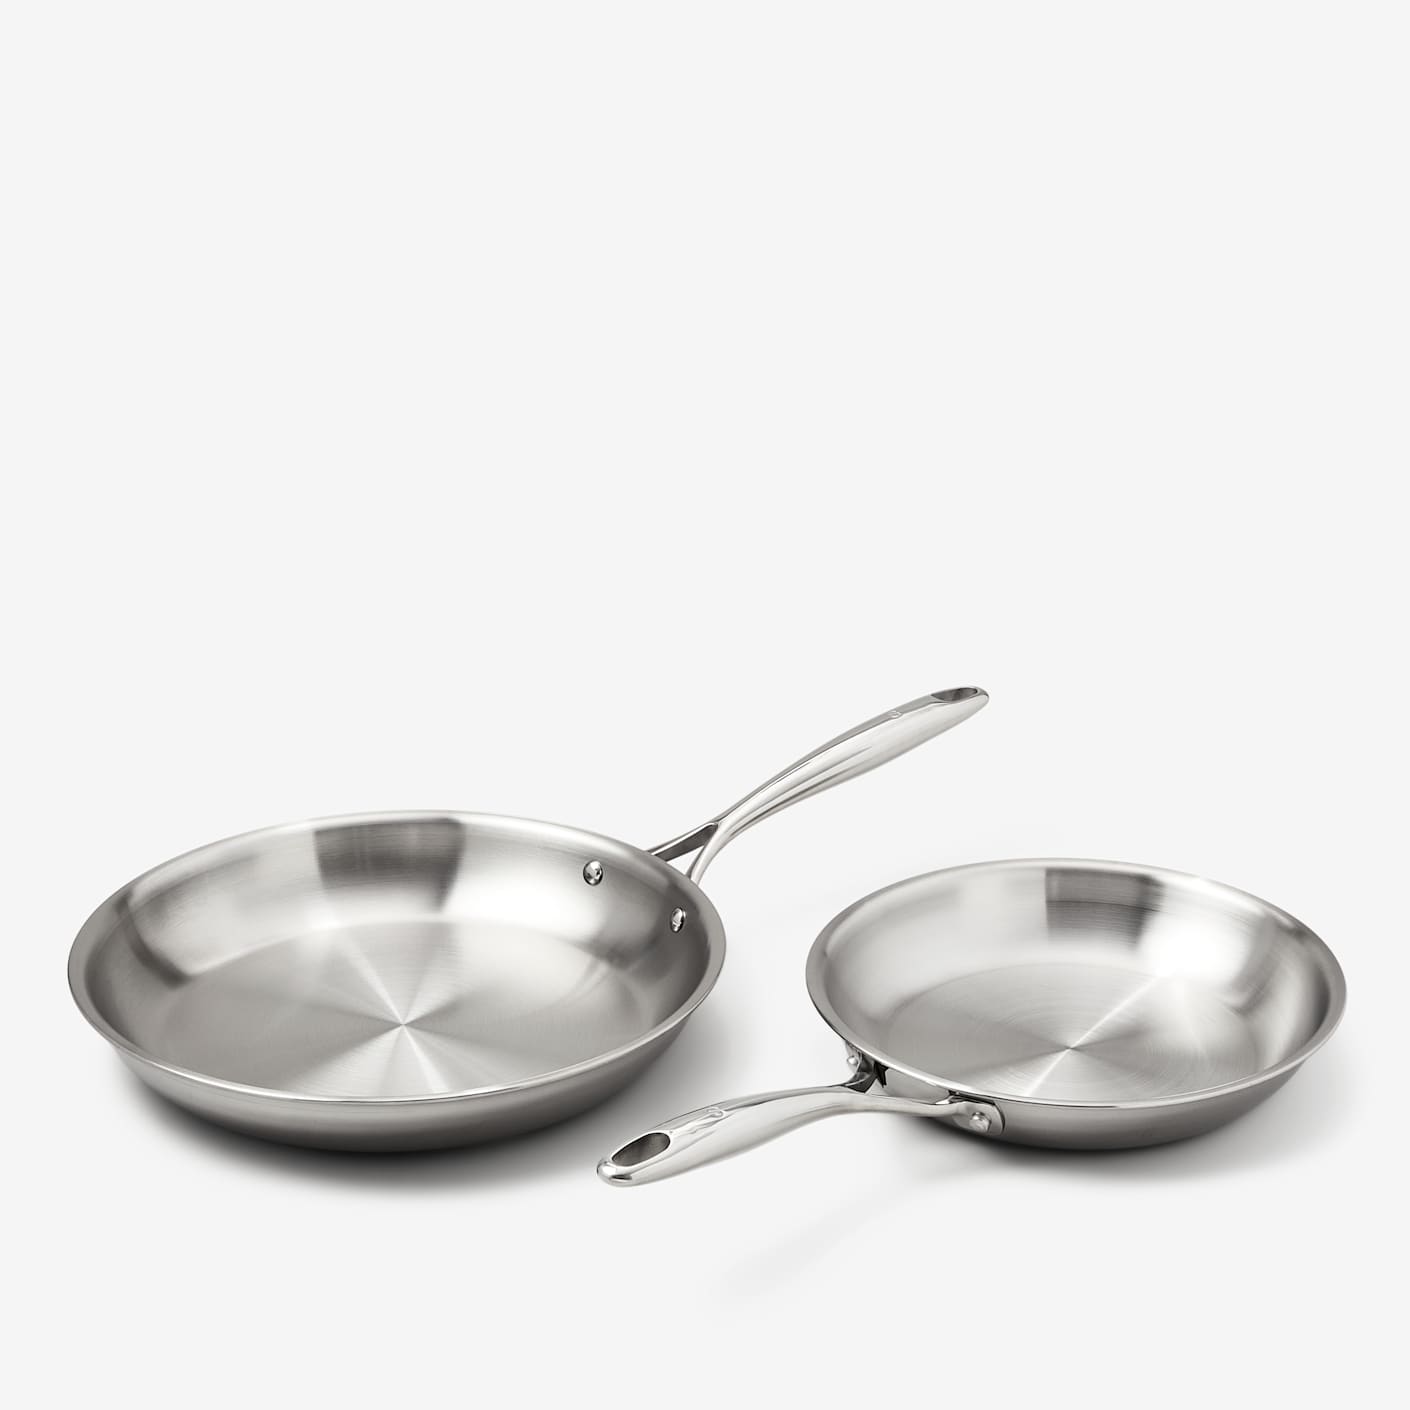 https://dam.bespokepost.com/image/upload/c_limit,dpr_auto,f_auto,q_auto,w_1410/v1/Storefront/2023/02-february/in-house/sardel-stainless-steel-fry-pan-duo_1